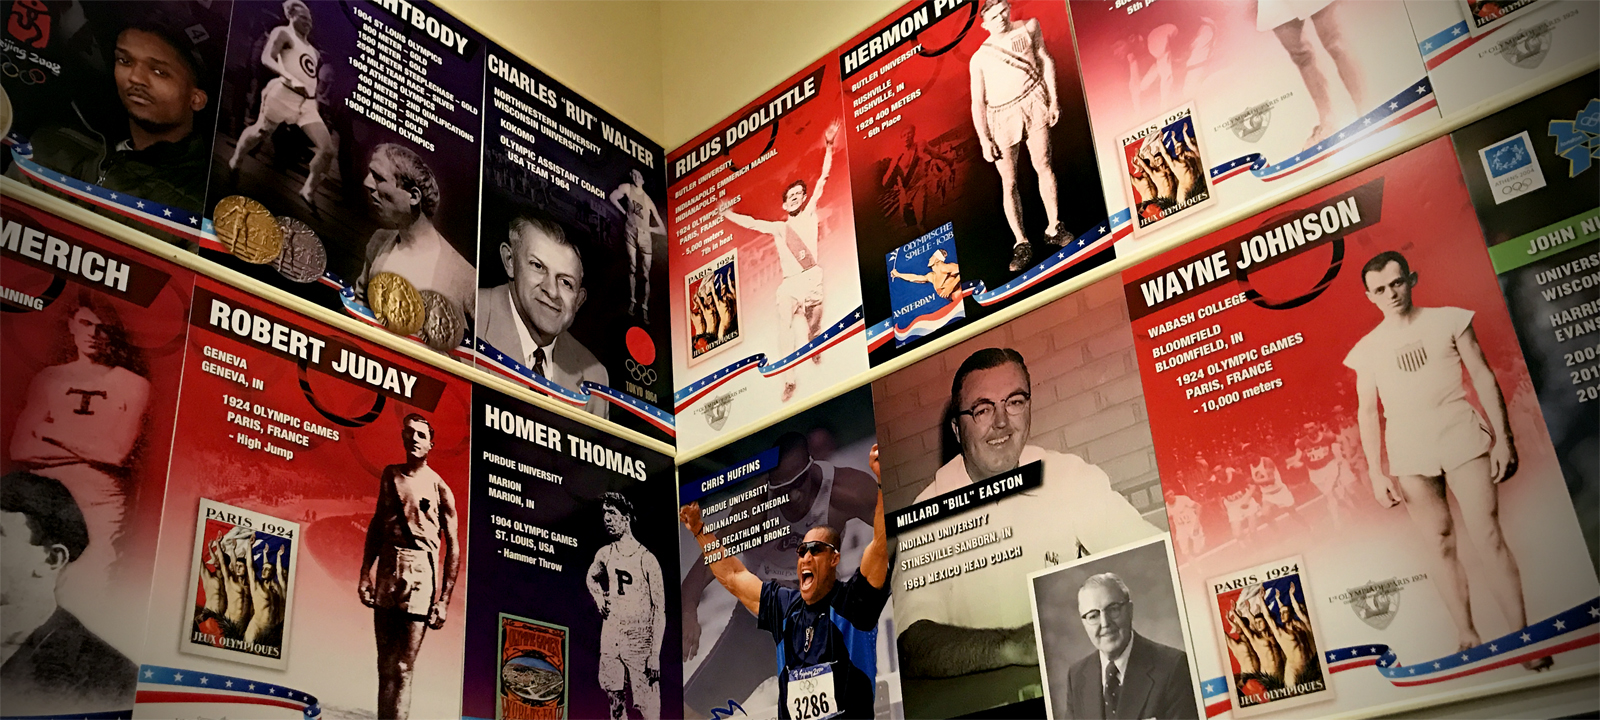 Indiana Track & Field and Cross Country Hall of Fame Museum